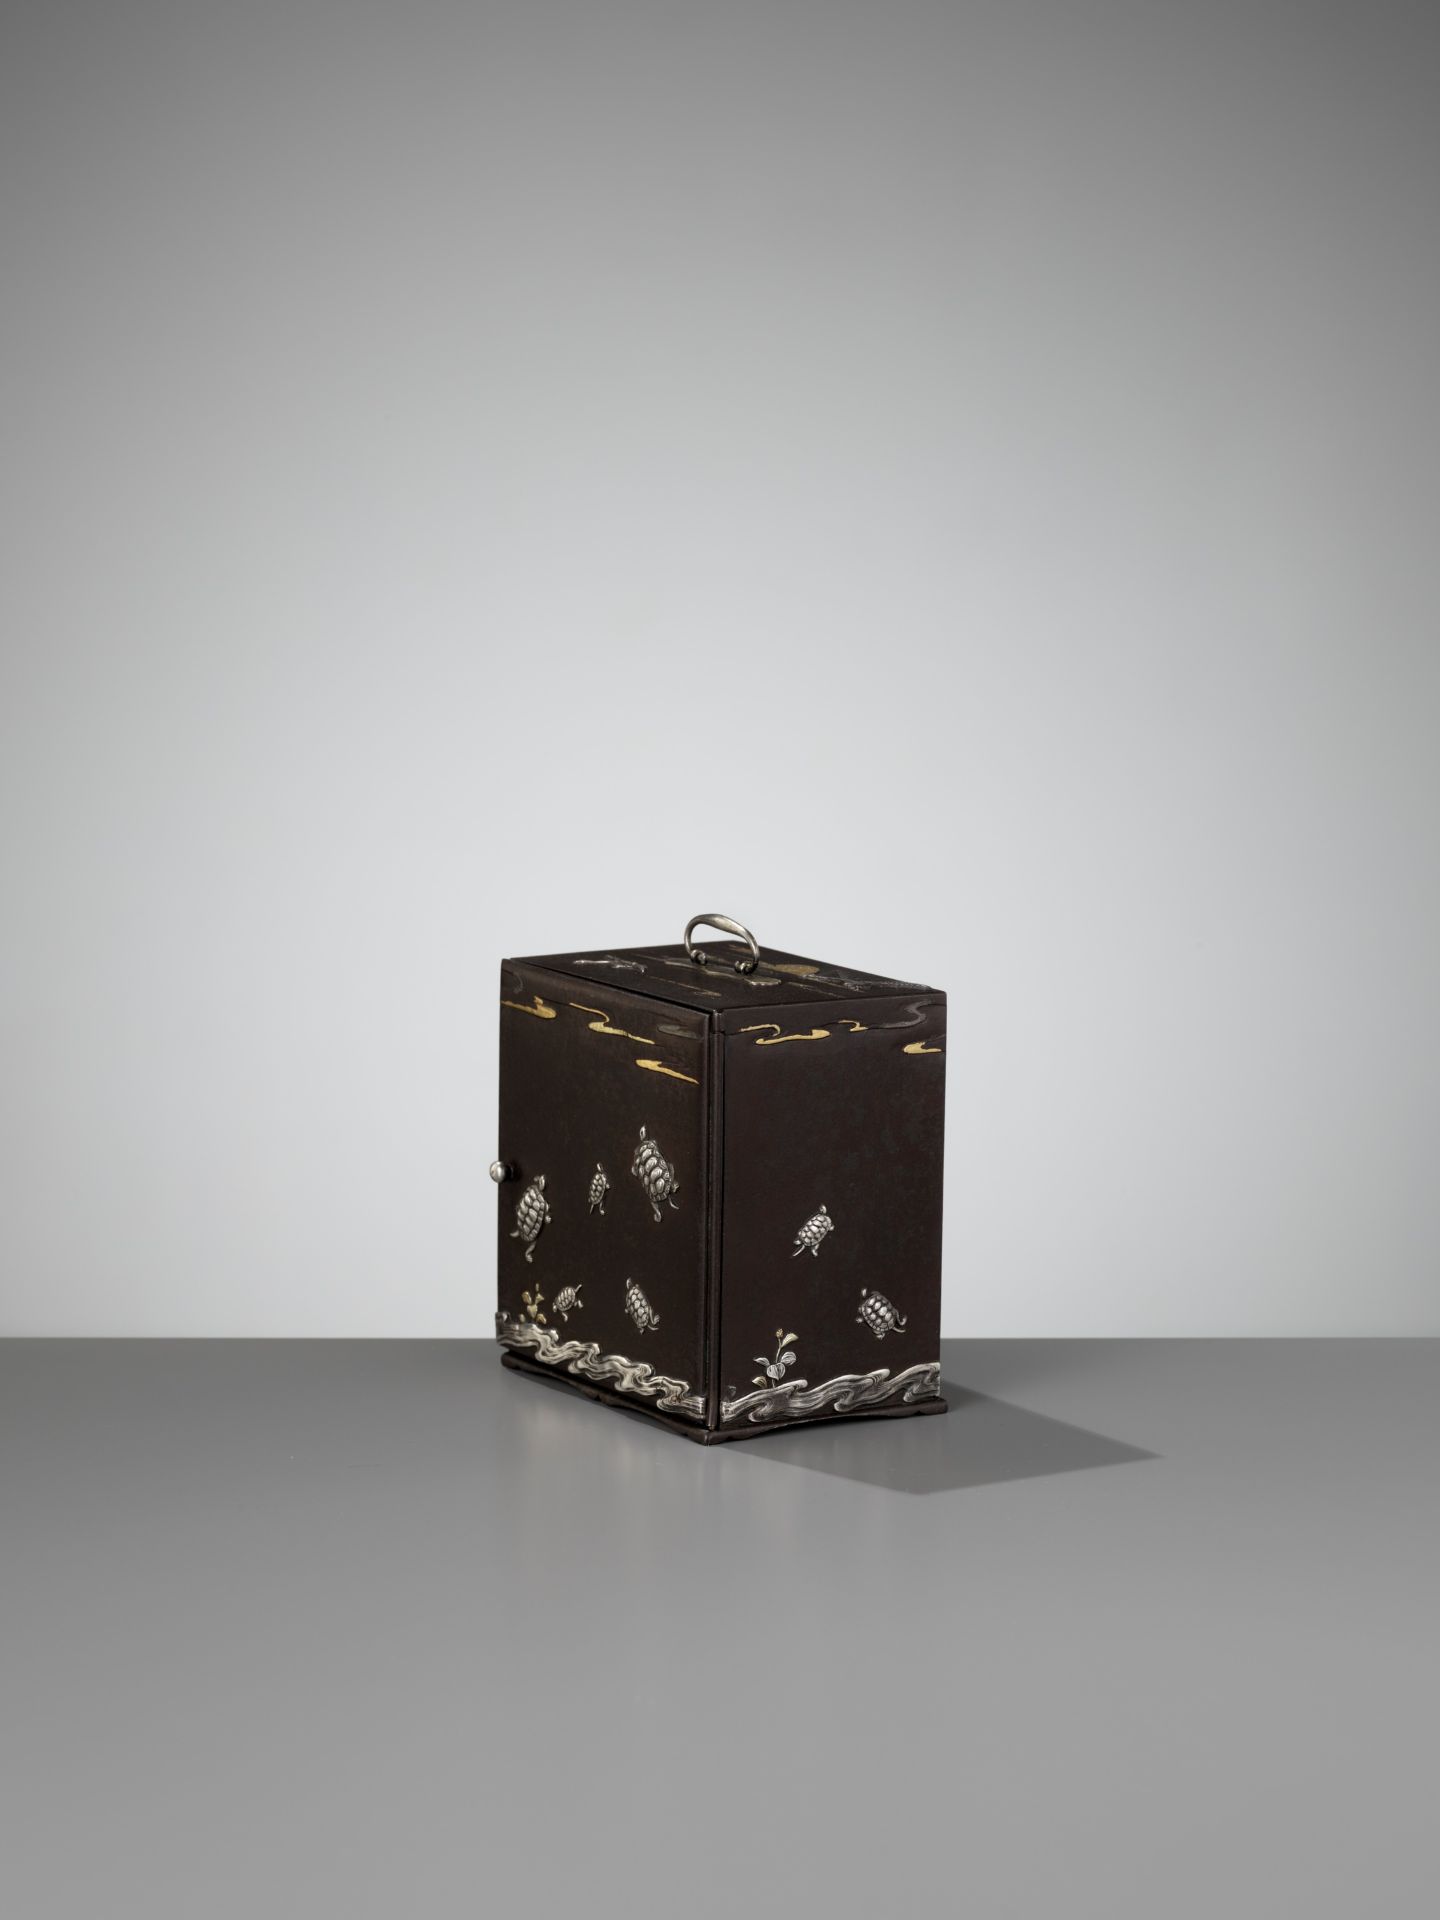 AN EXCEPTIONALLY RARE INLAID IRON MINIATURE KODANSU (CABINET) WITH TURTLES AND CRANES - Image 2 of 12